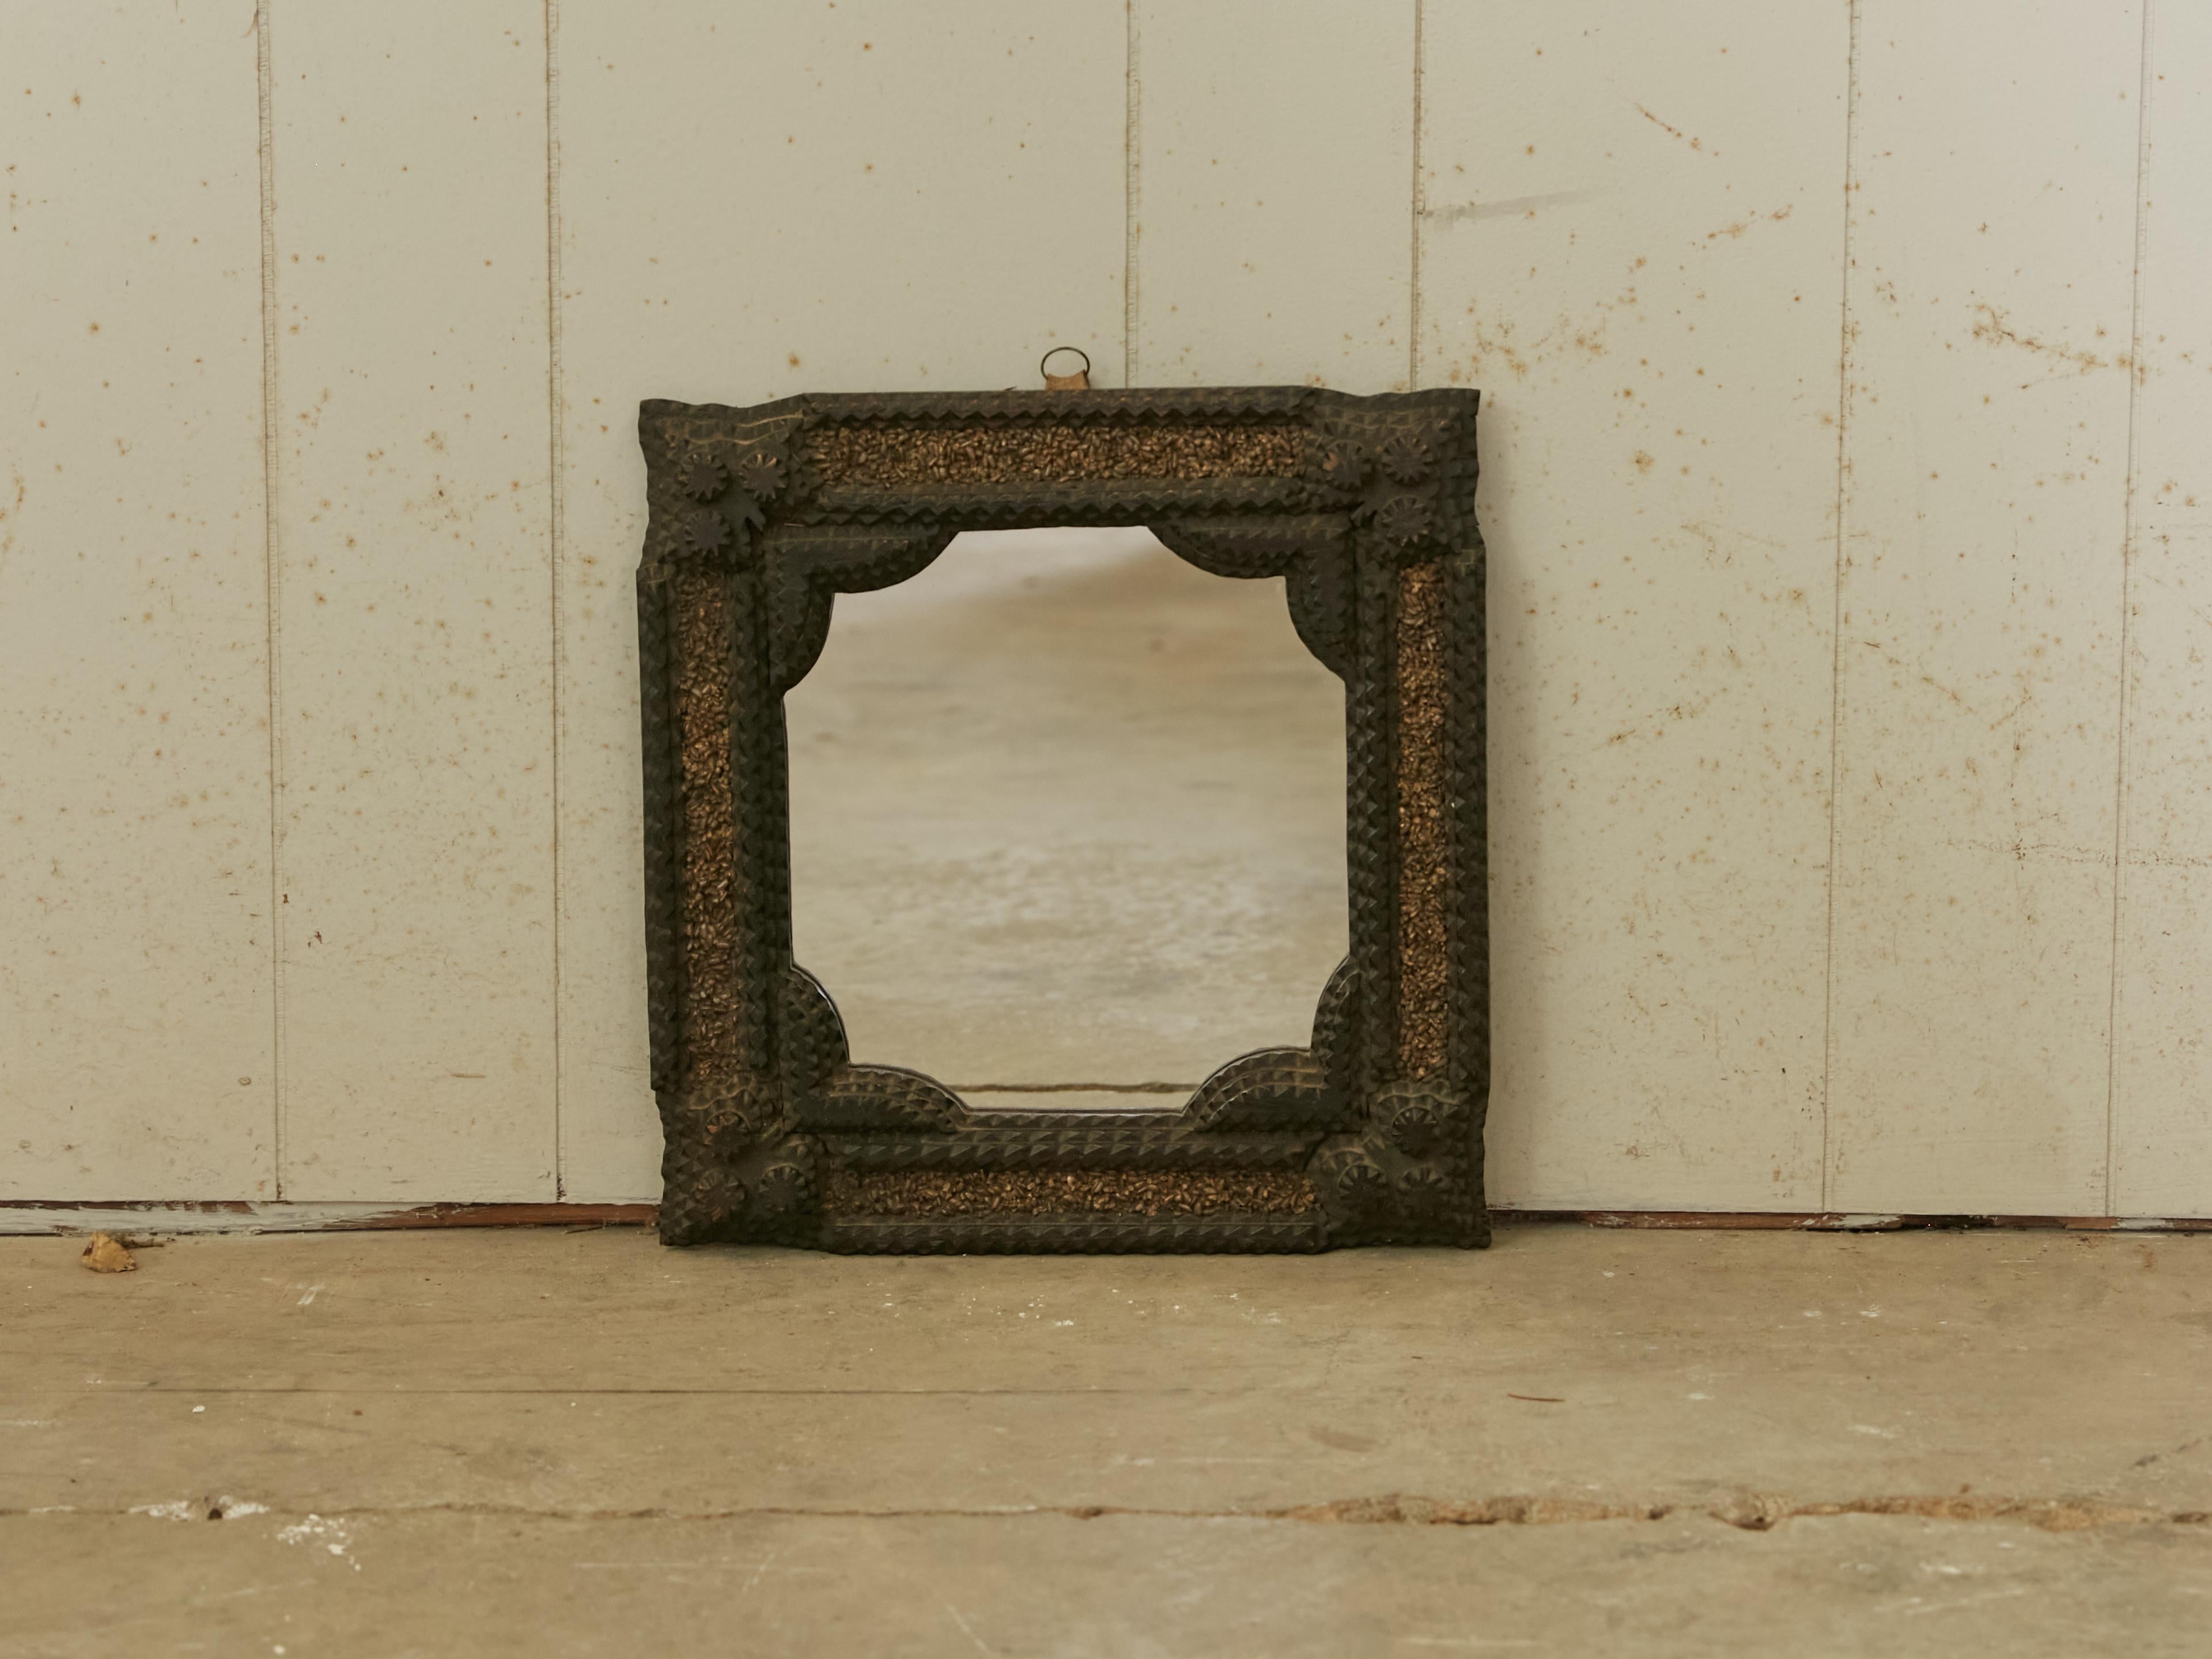 A petite French Turn of the Century Tramp Art wooden mirror from the early 20th century with hand-carved frame and raised motifs. Created in France at the Turn of the Century which saw the transition between the 19th to the 20th, this wall mirror